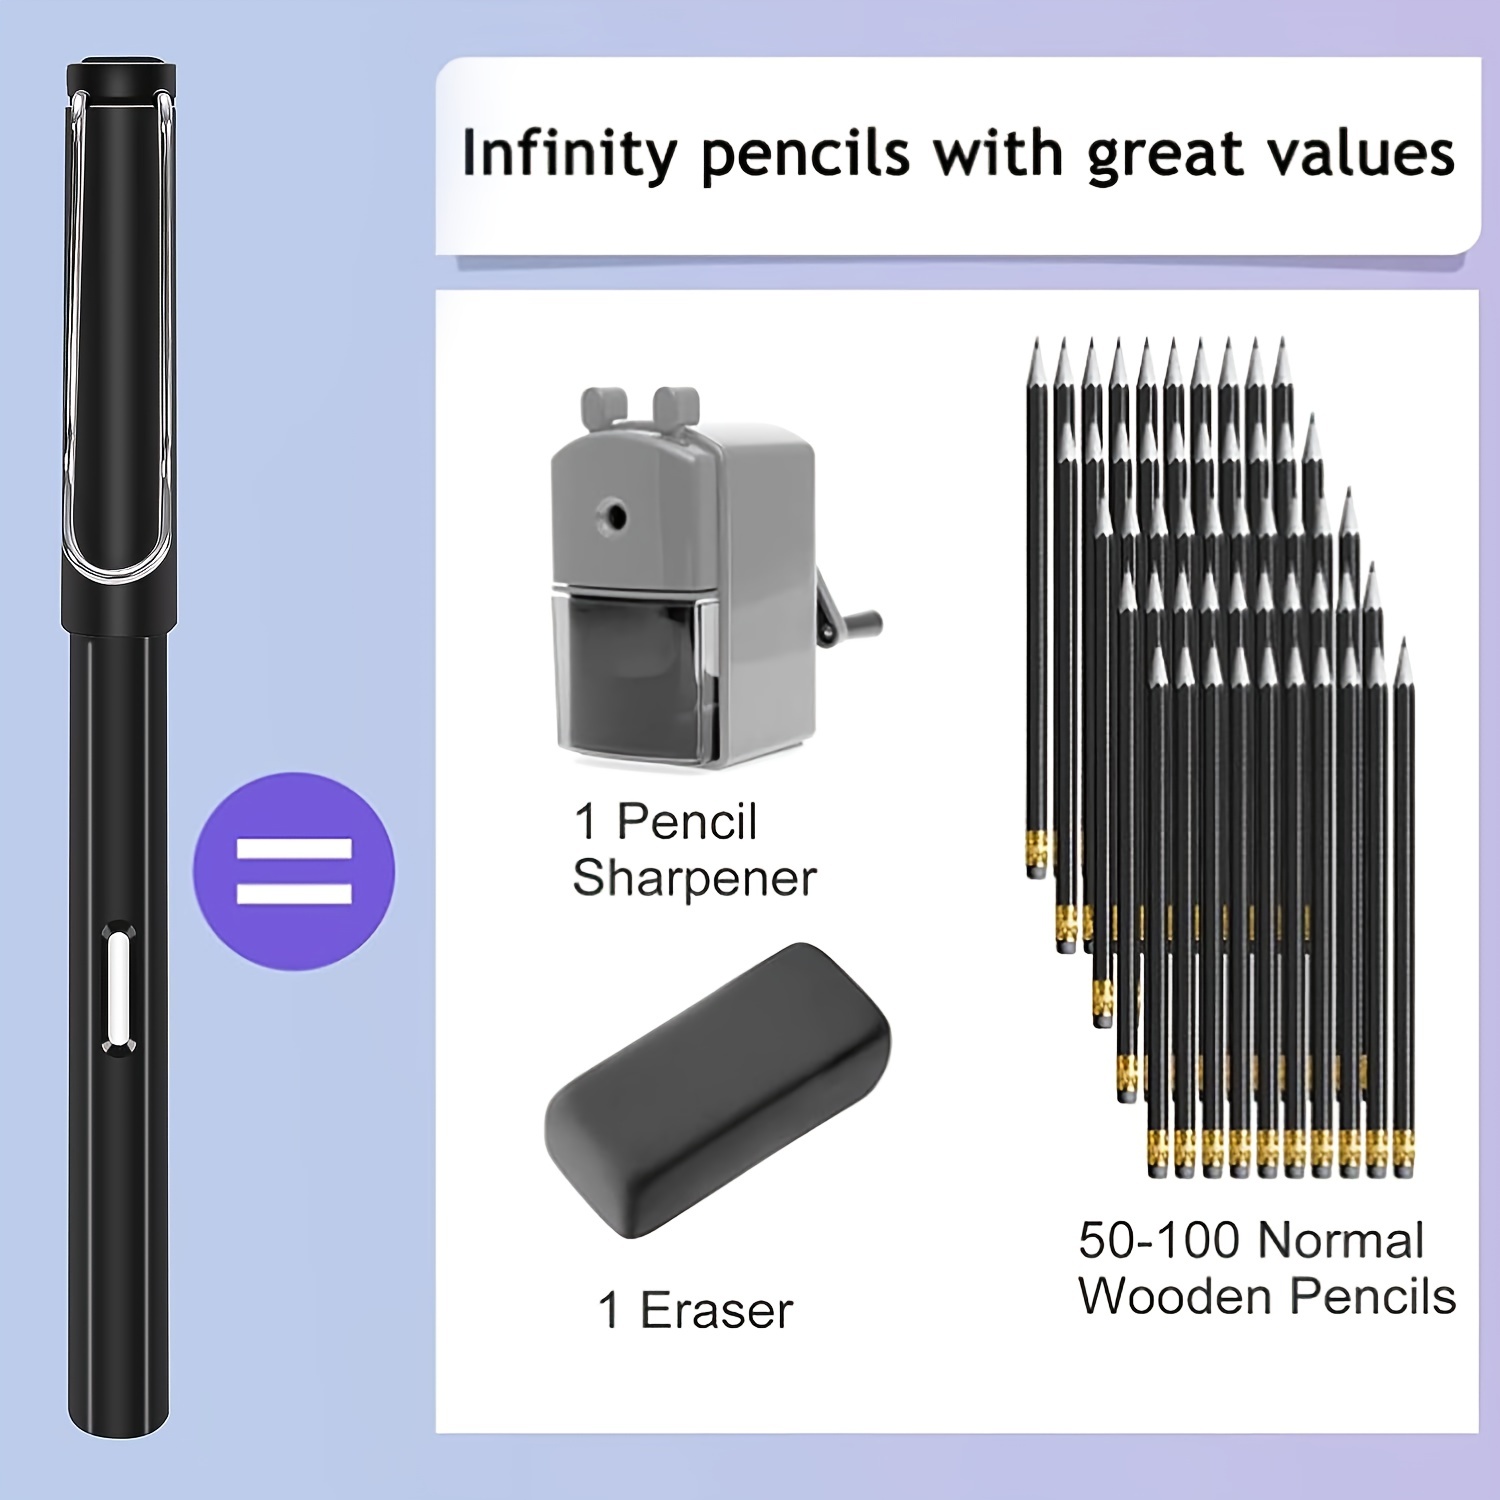 Inkless Pencils Eternal,Everlasting Magic Pencil with Eraser,Unlimited  Writing, Reusable Infinity Pencil, NO-Sharpening Pencils for Writing